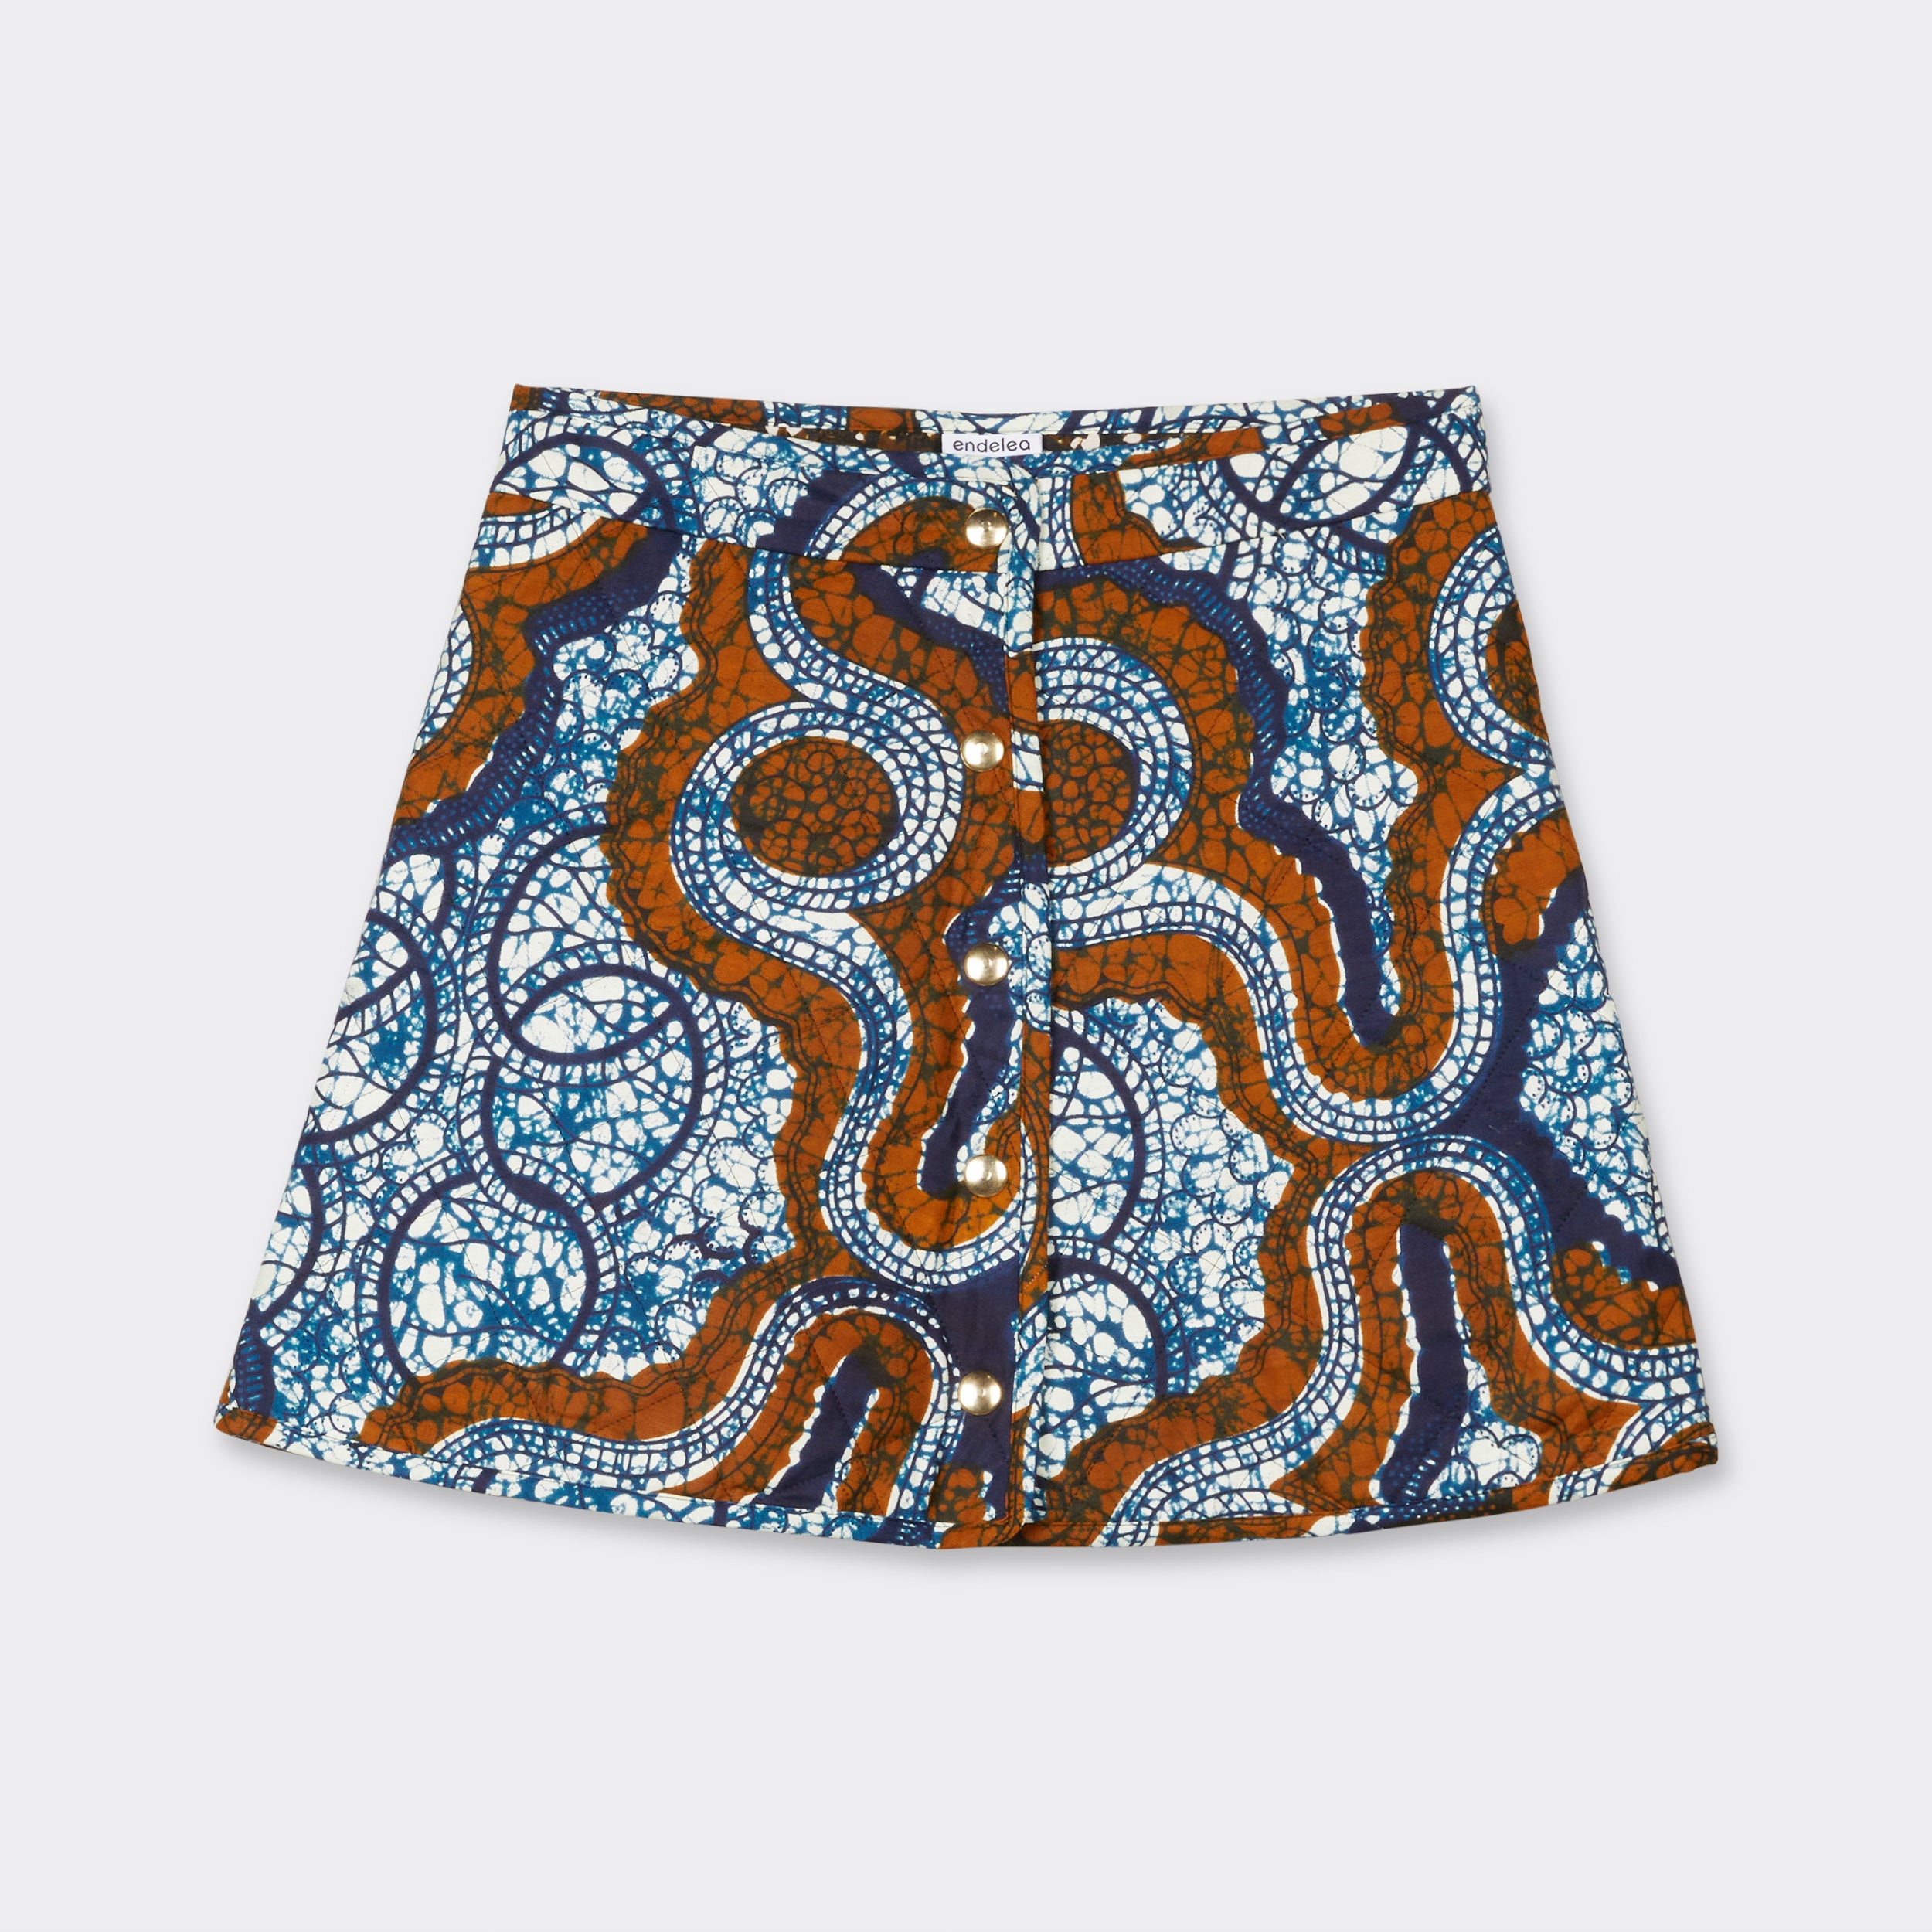 Reversible quilted mini skirt in African waxed fabric in blue& brown "marble" pattern with golden snap buttons on one model